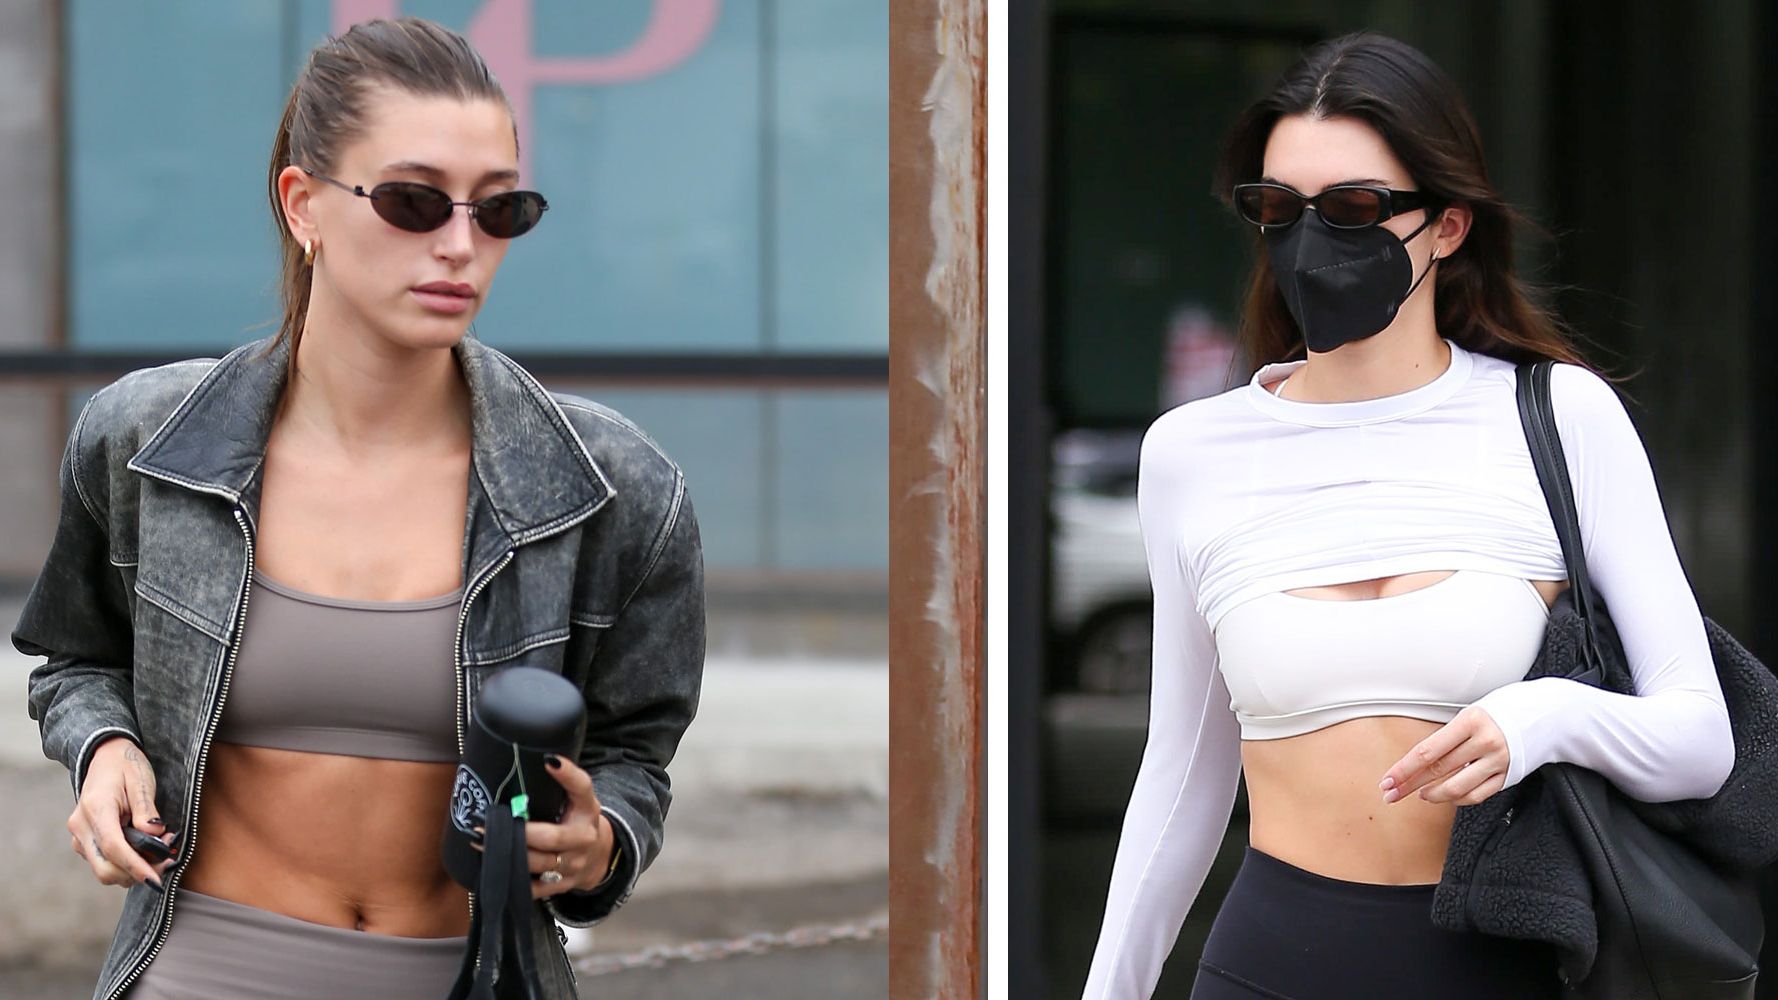 WHAT SHE WORE: Kendall Jenner in grey top black leggings and white